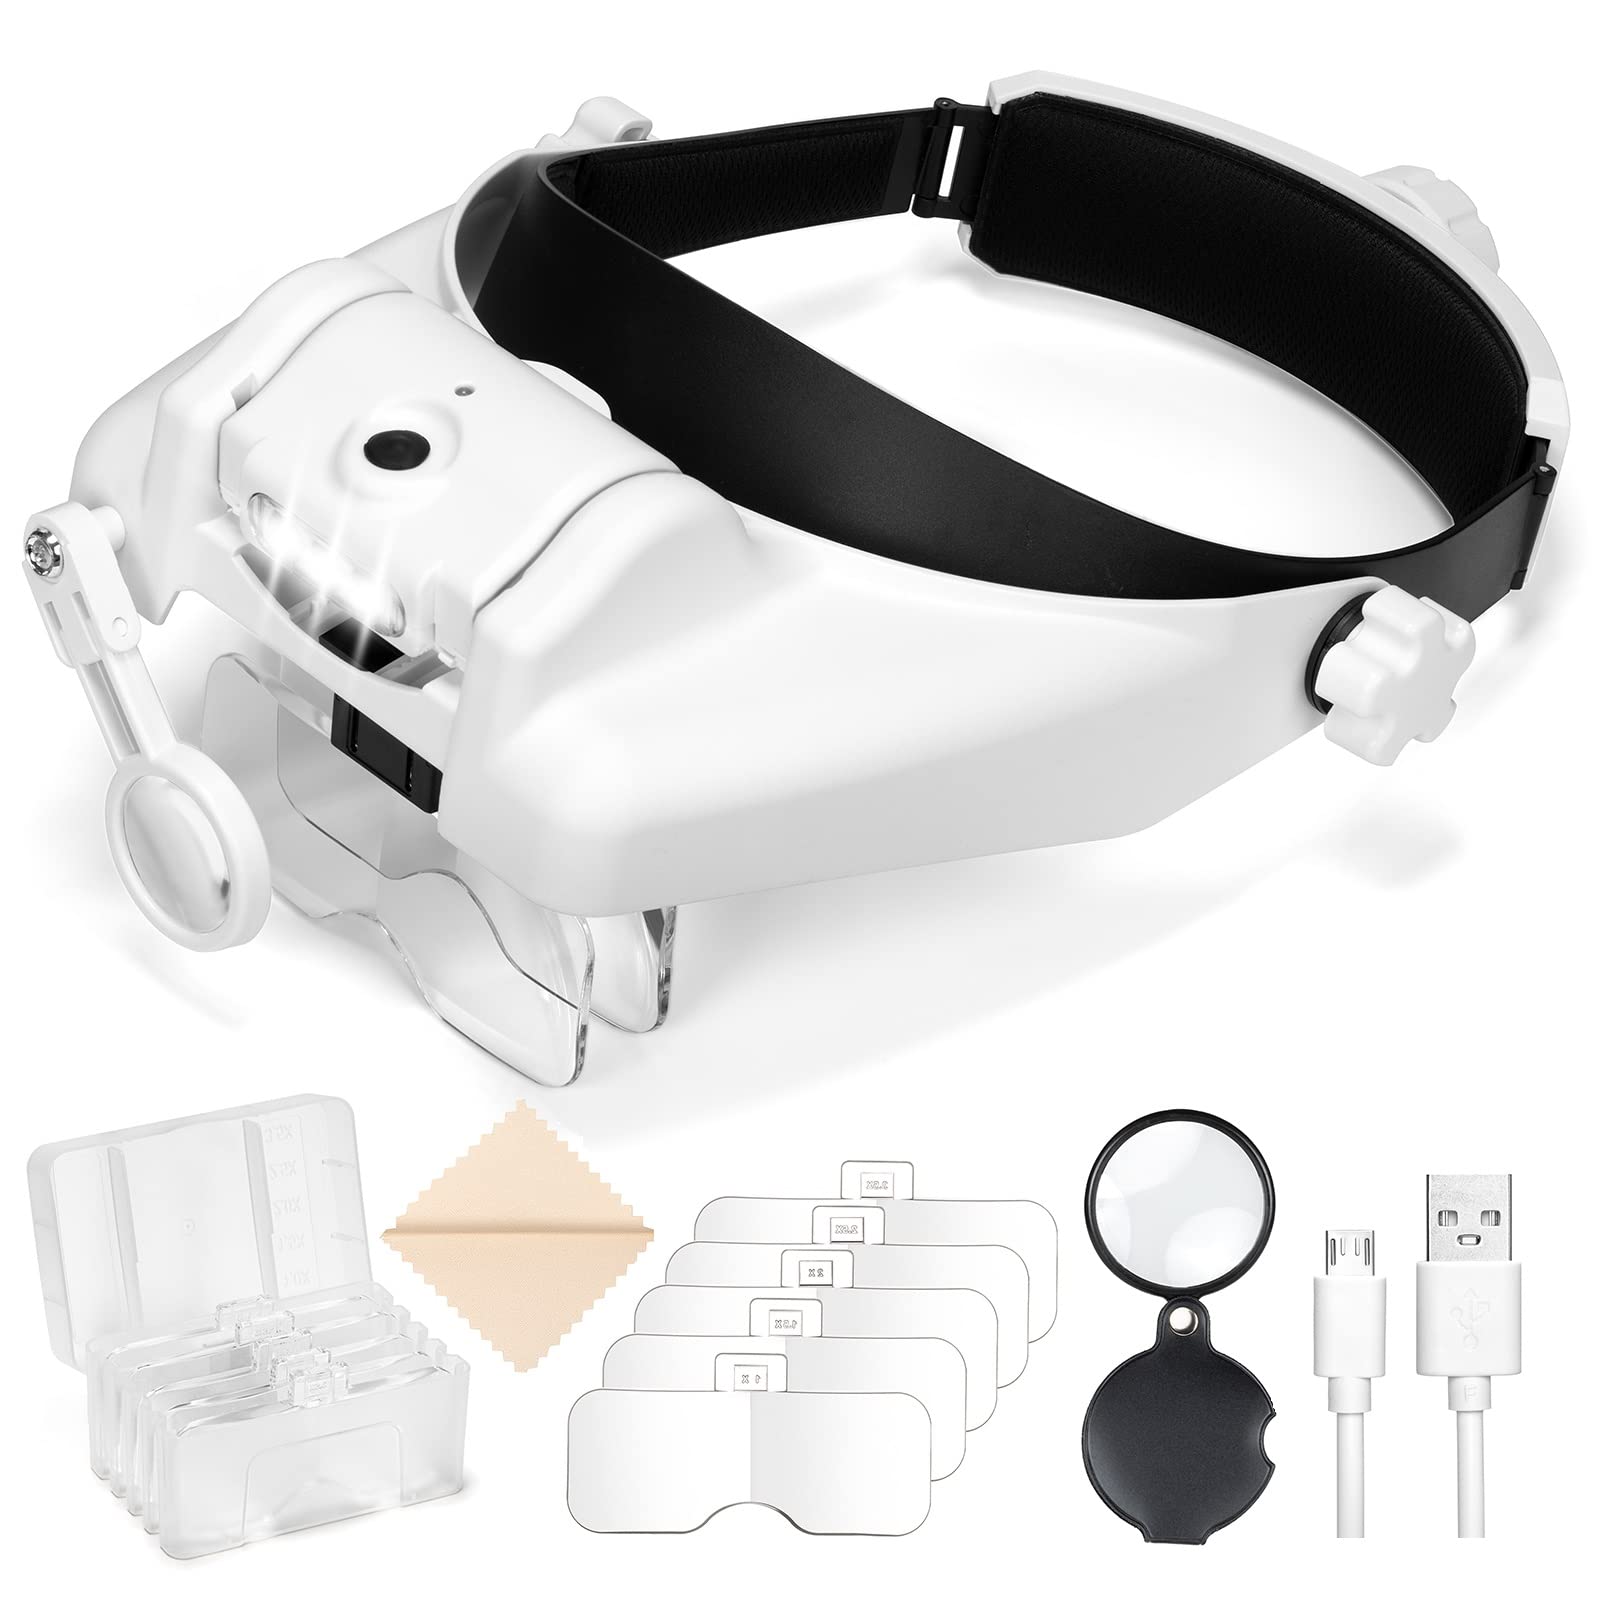 Magnifying Glass Magnifier Glass Hand Held Magnifier with 8 LED Lights  Illuminated Magnifying Glass USB Hands Free 5X 11X for Reading Jewlery  Craft